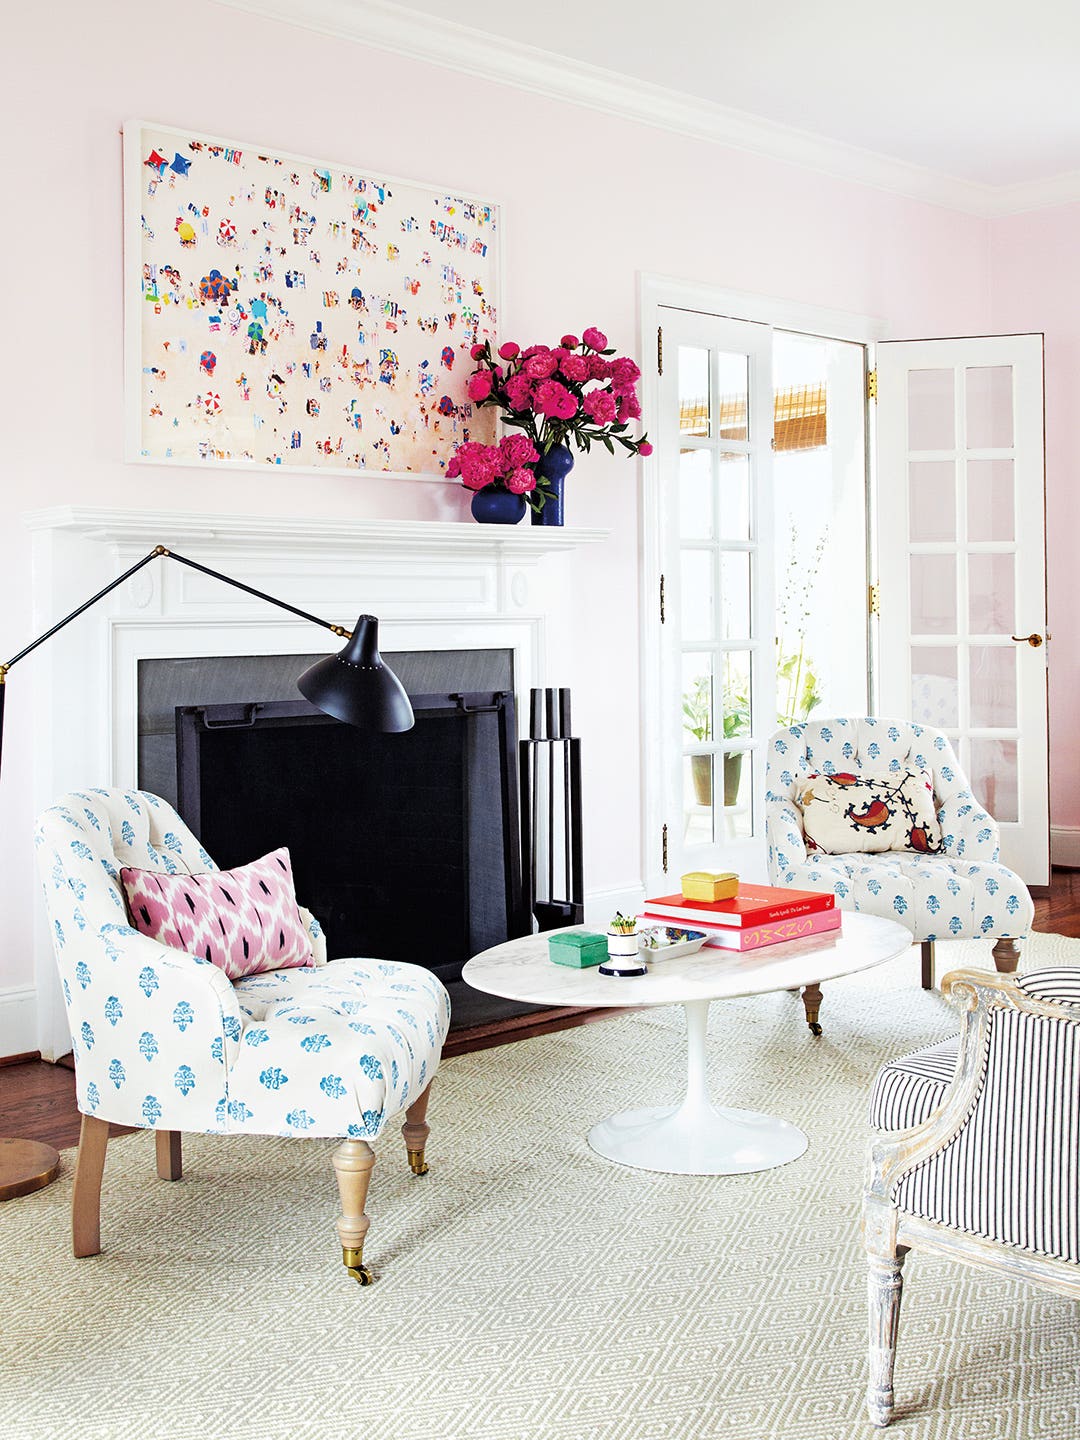 Living room with pink walls and patterned chairs